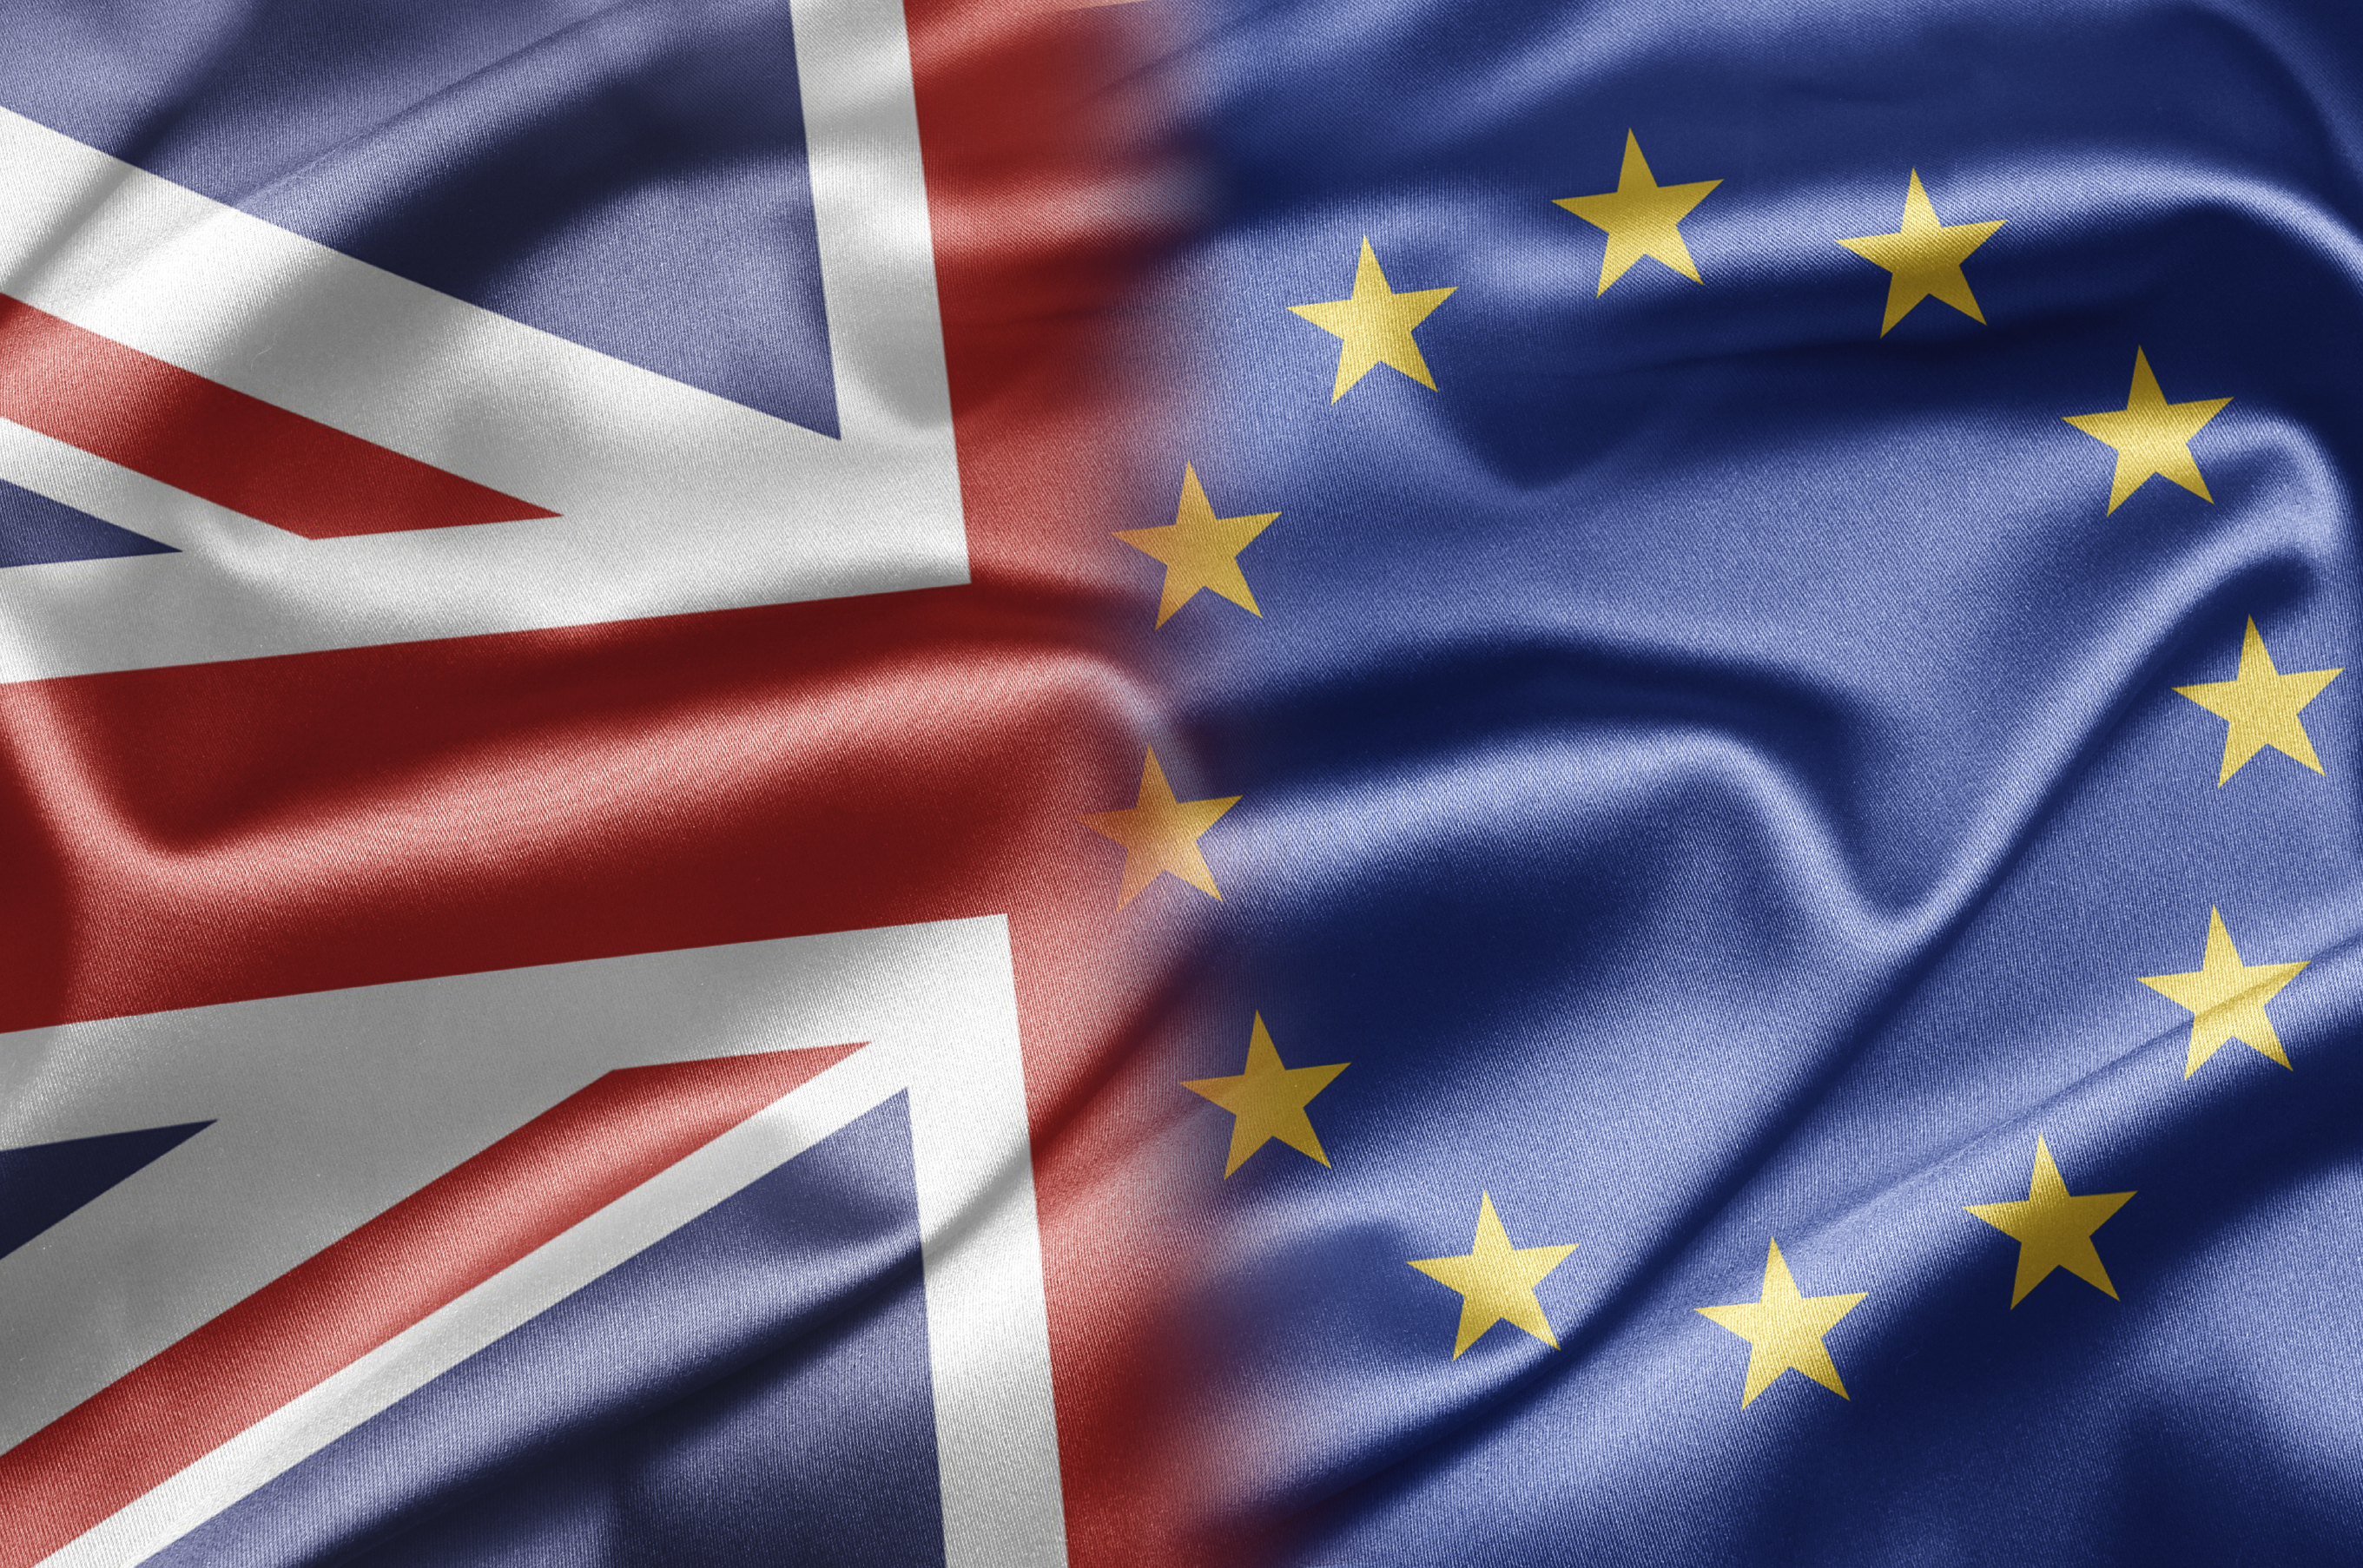 Brexit or Brin? What does the printing industry think?